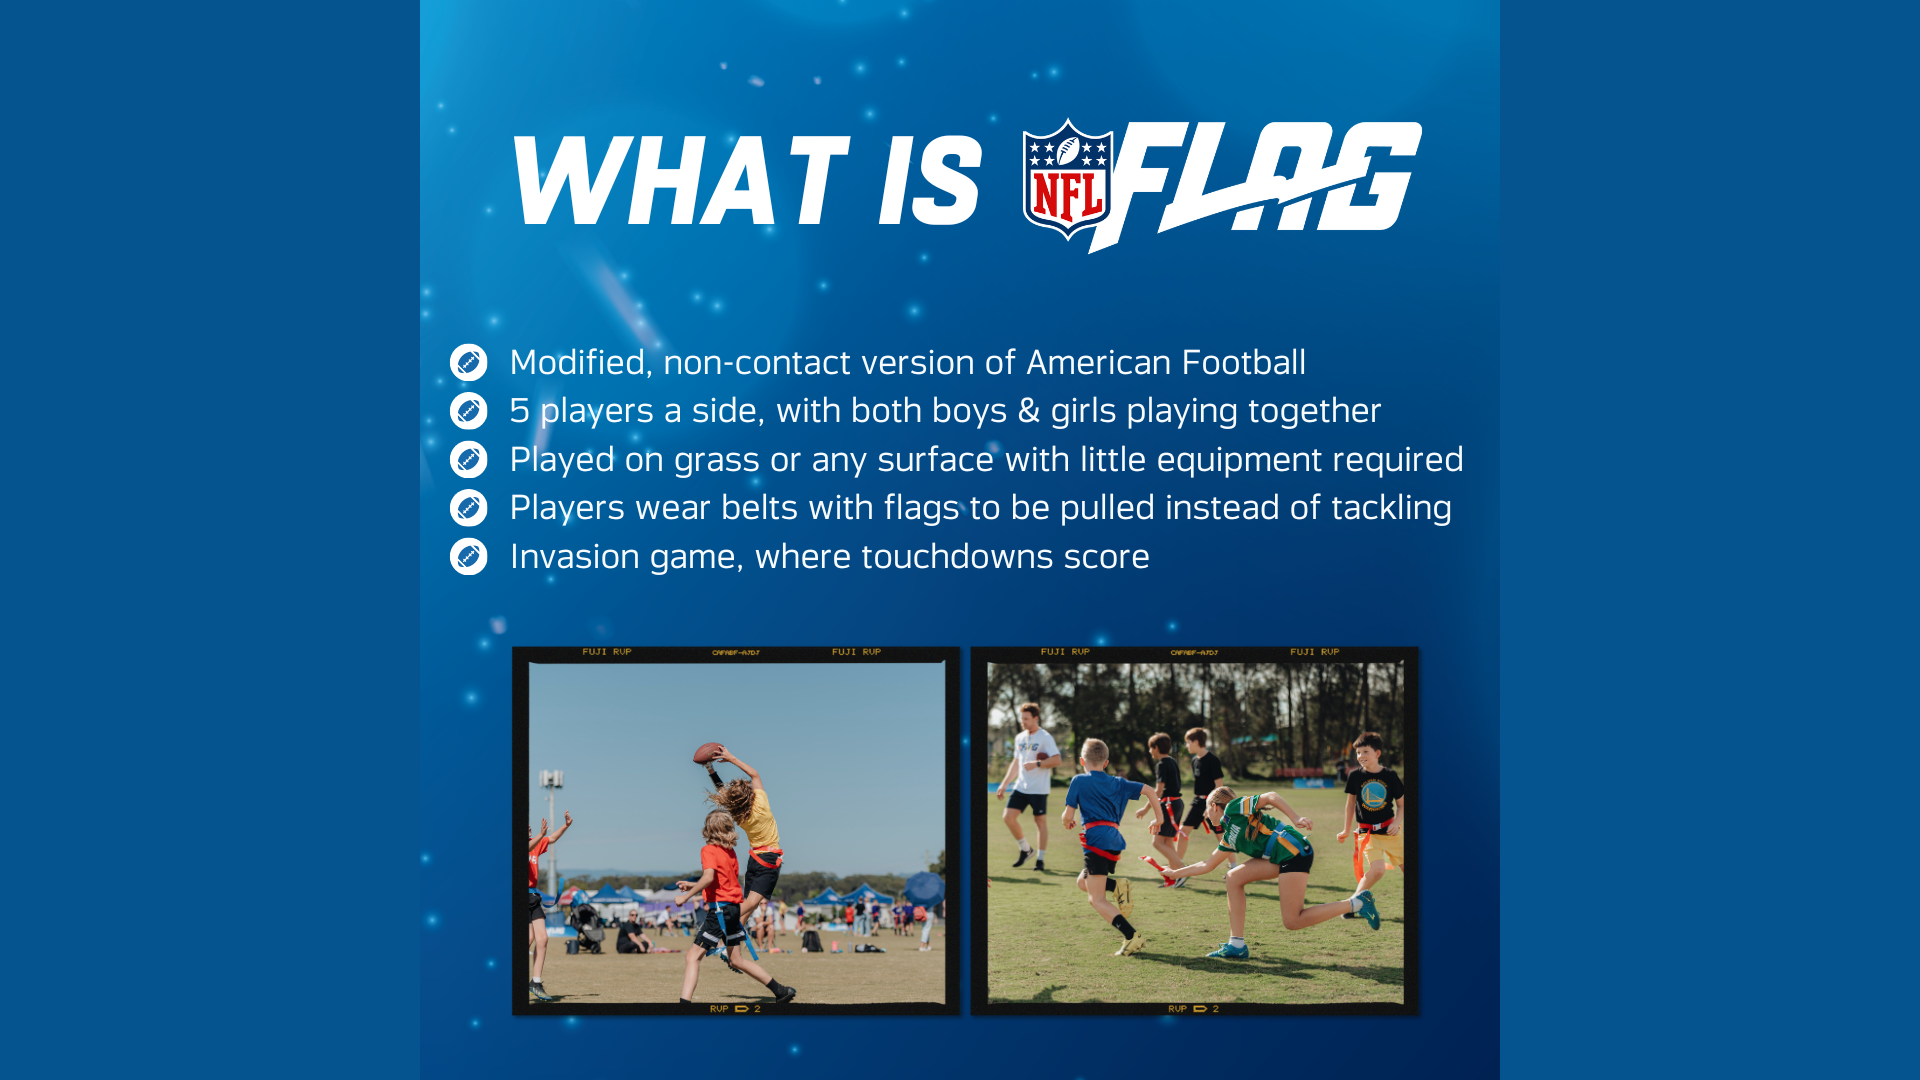 Kids invited to come and try NFL Flag